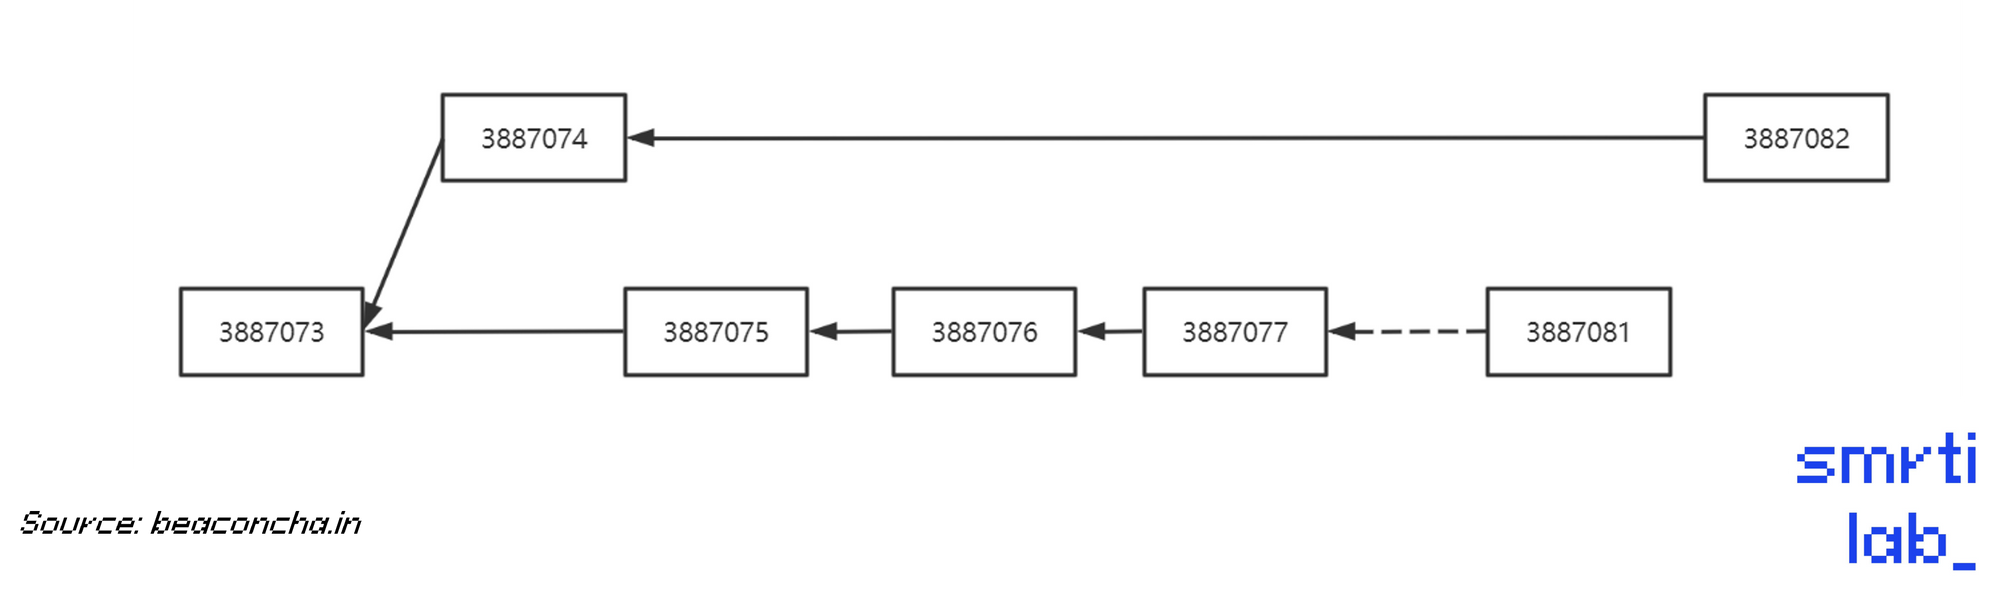 Fig 3. Re-org Blocks of Beacon chain